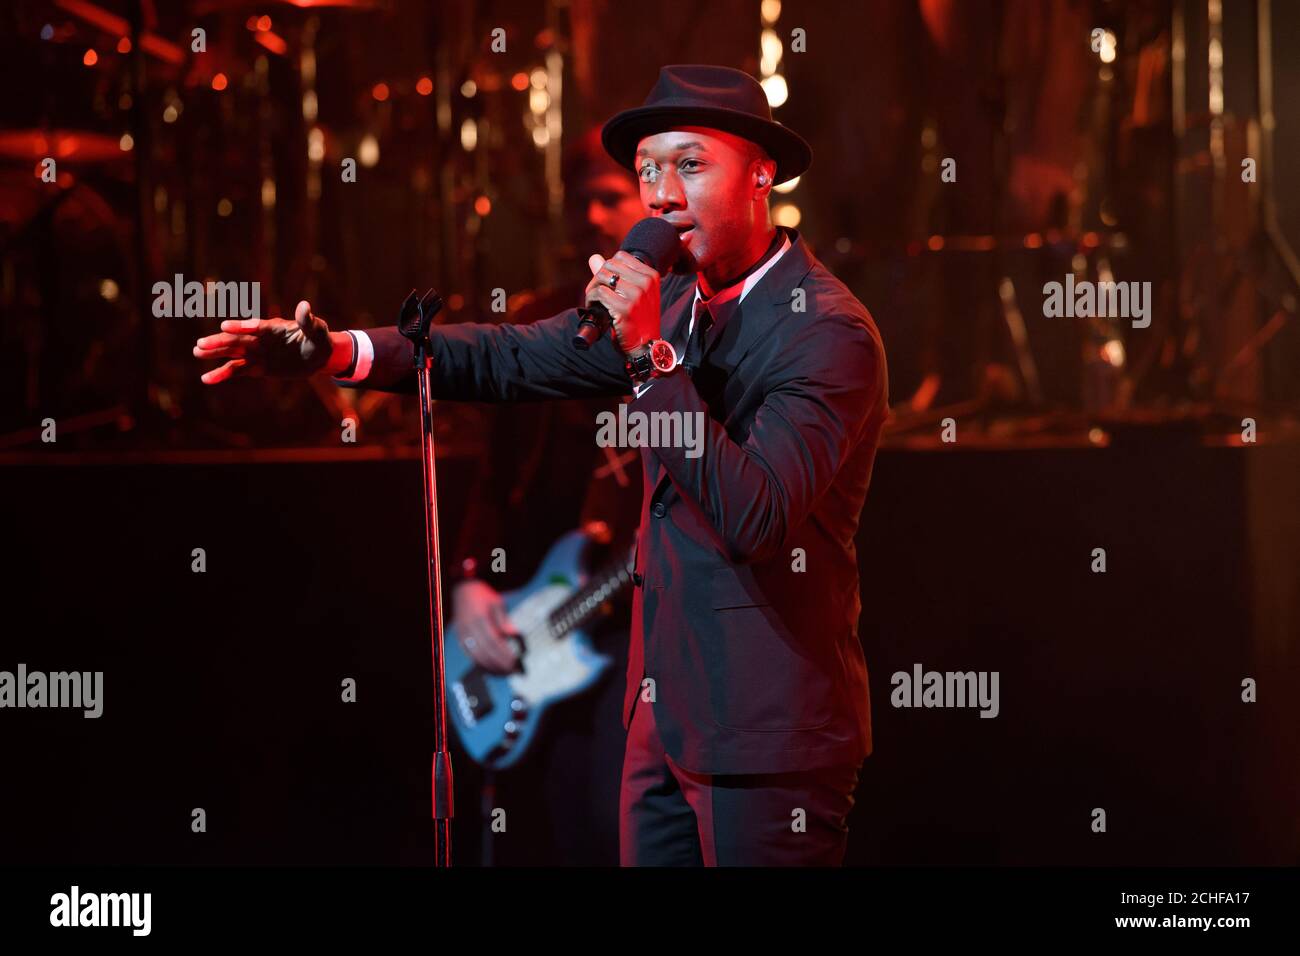 EDITORIAL USE ONLY Singer-songwriter Aloe Blacc performs at A Night of American Music, hosted by Brand USA to celebrate the opening of Travel Week Europe 2019, at the Royal Opera House in London. PA Photo. Picture date: Monday September 9, 2019. Photo credit should read: Jonathan Hordle/PA Wire Stock Photo